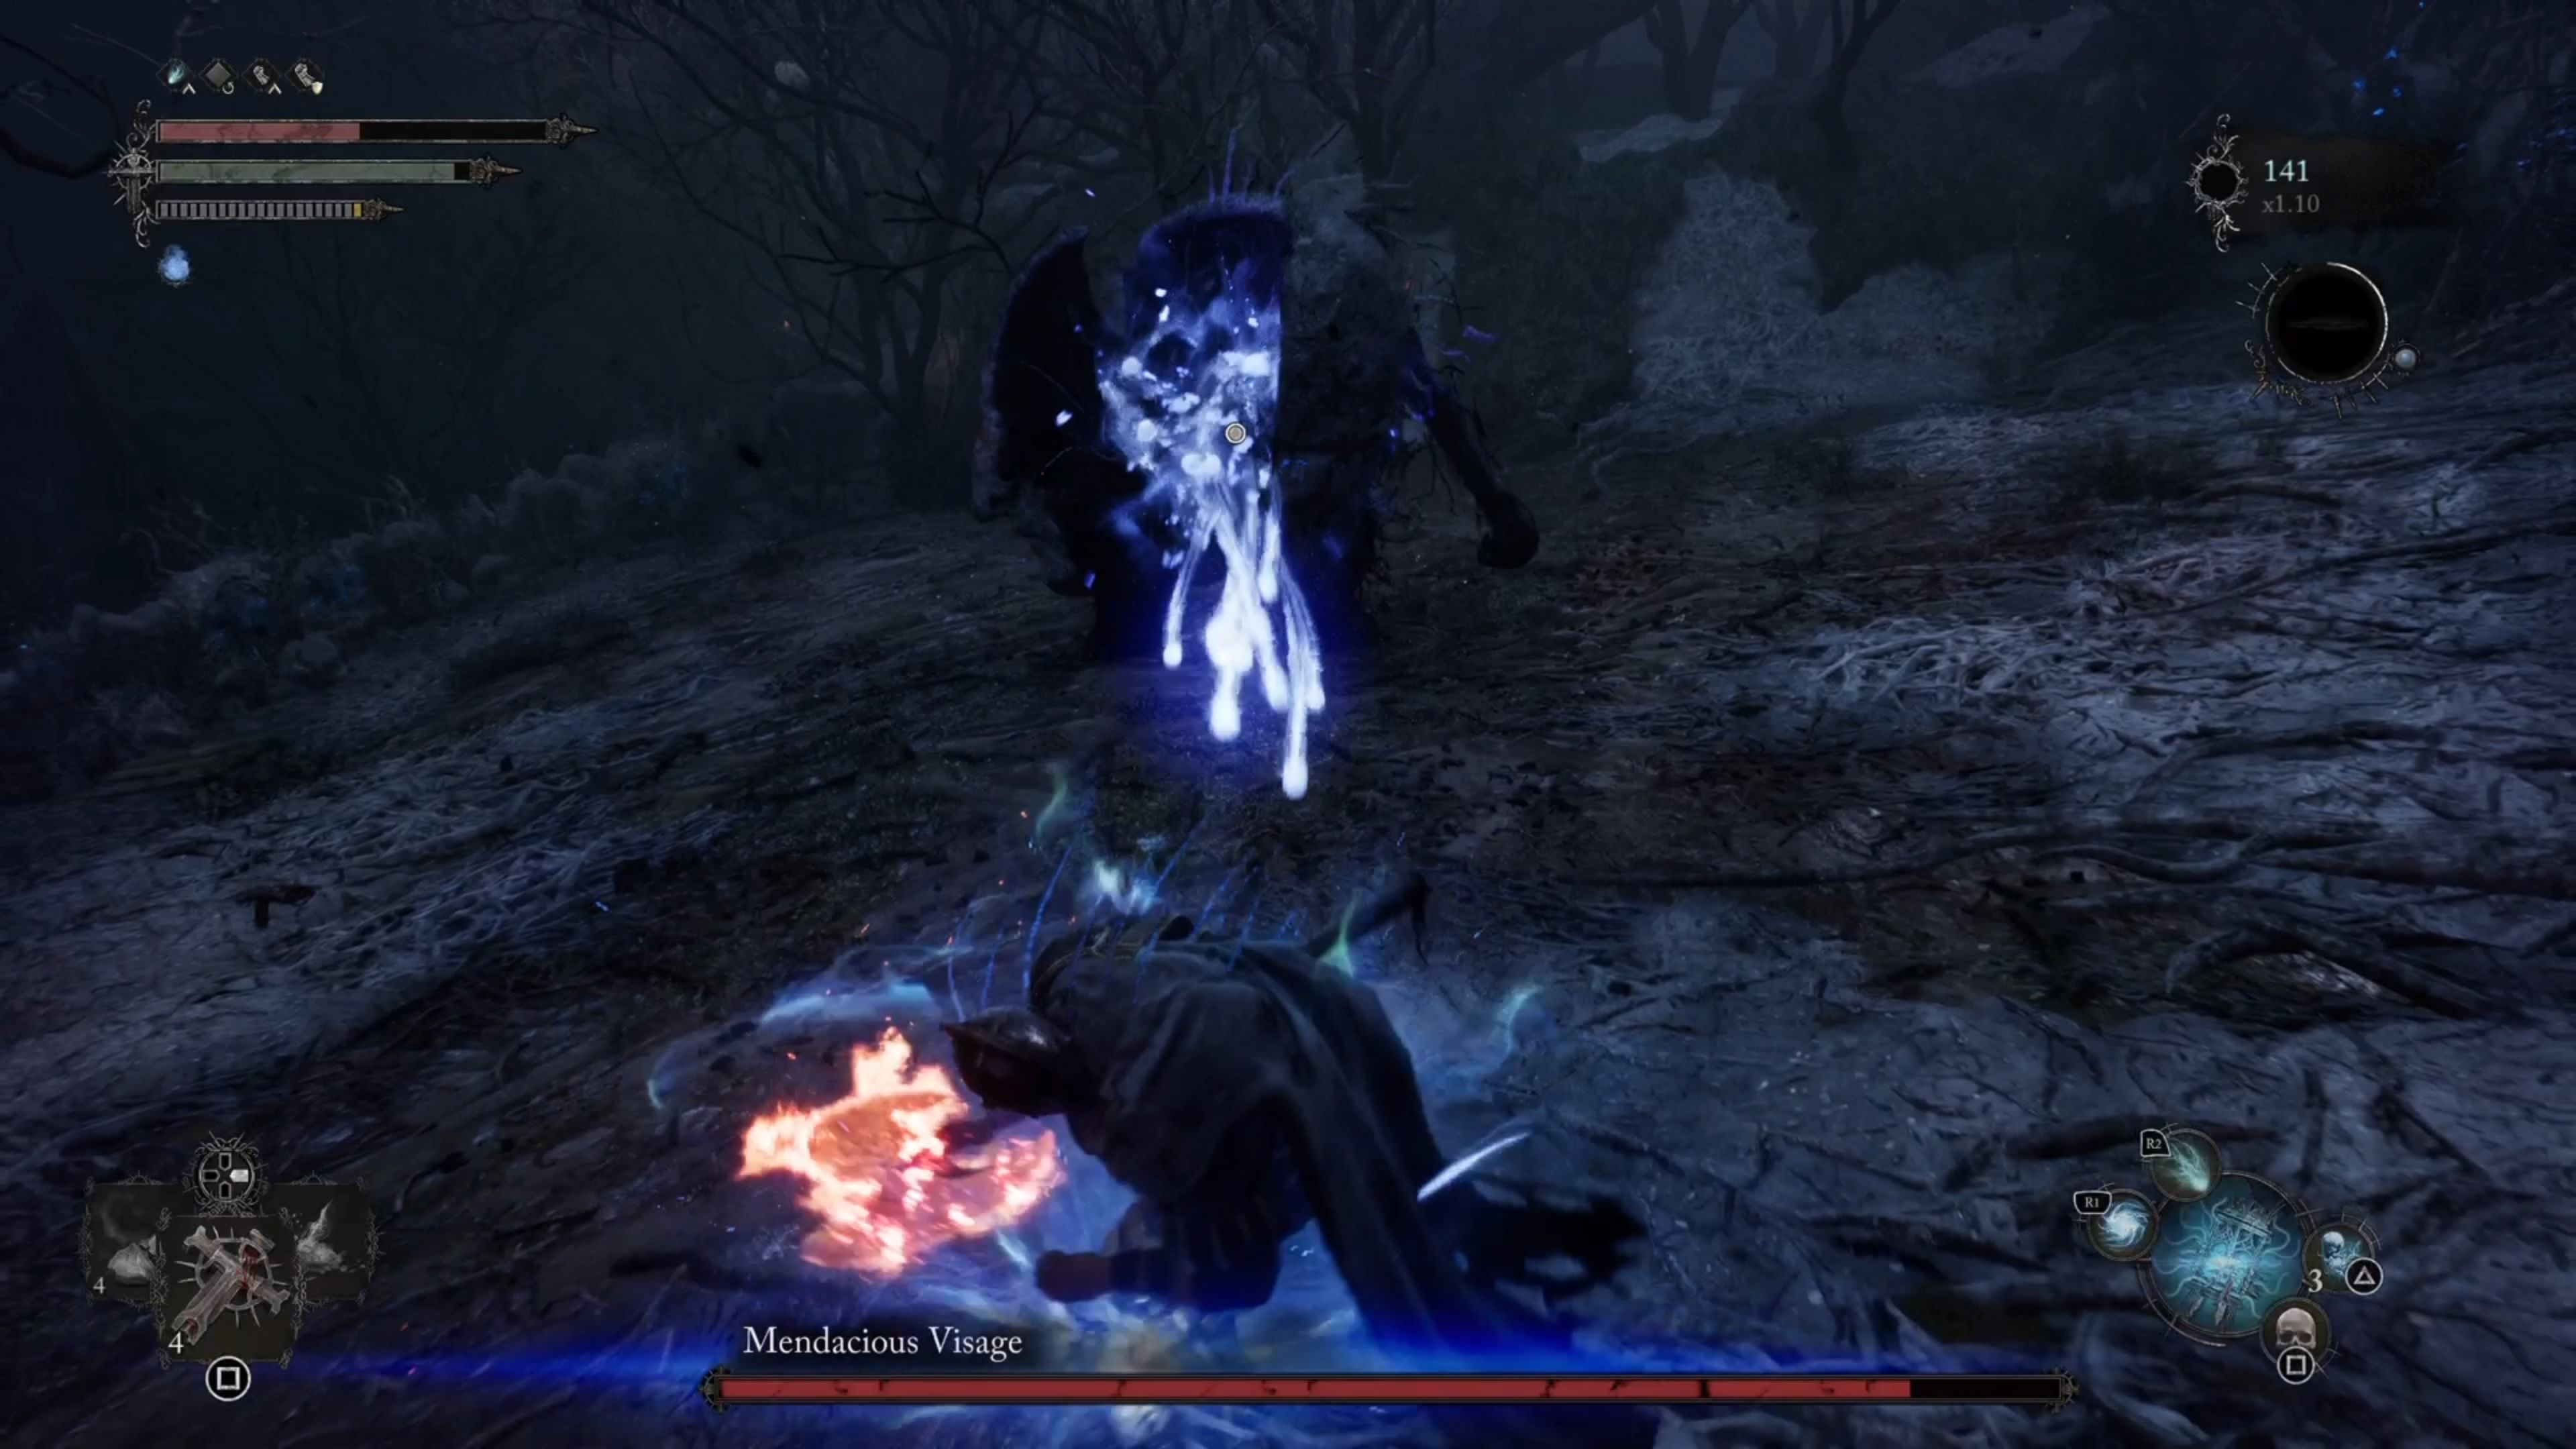 Mendacious Visage Boss doing ranged umbral magic attack in Lords of the Fallen